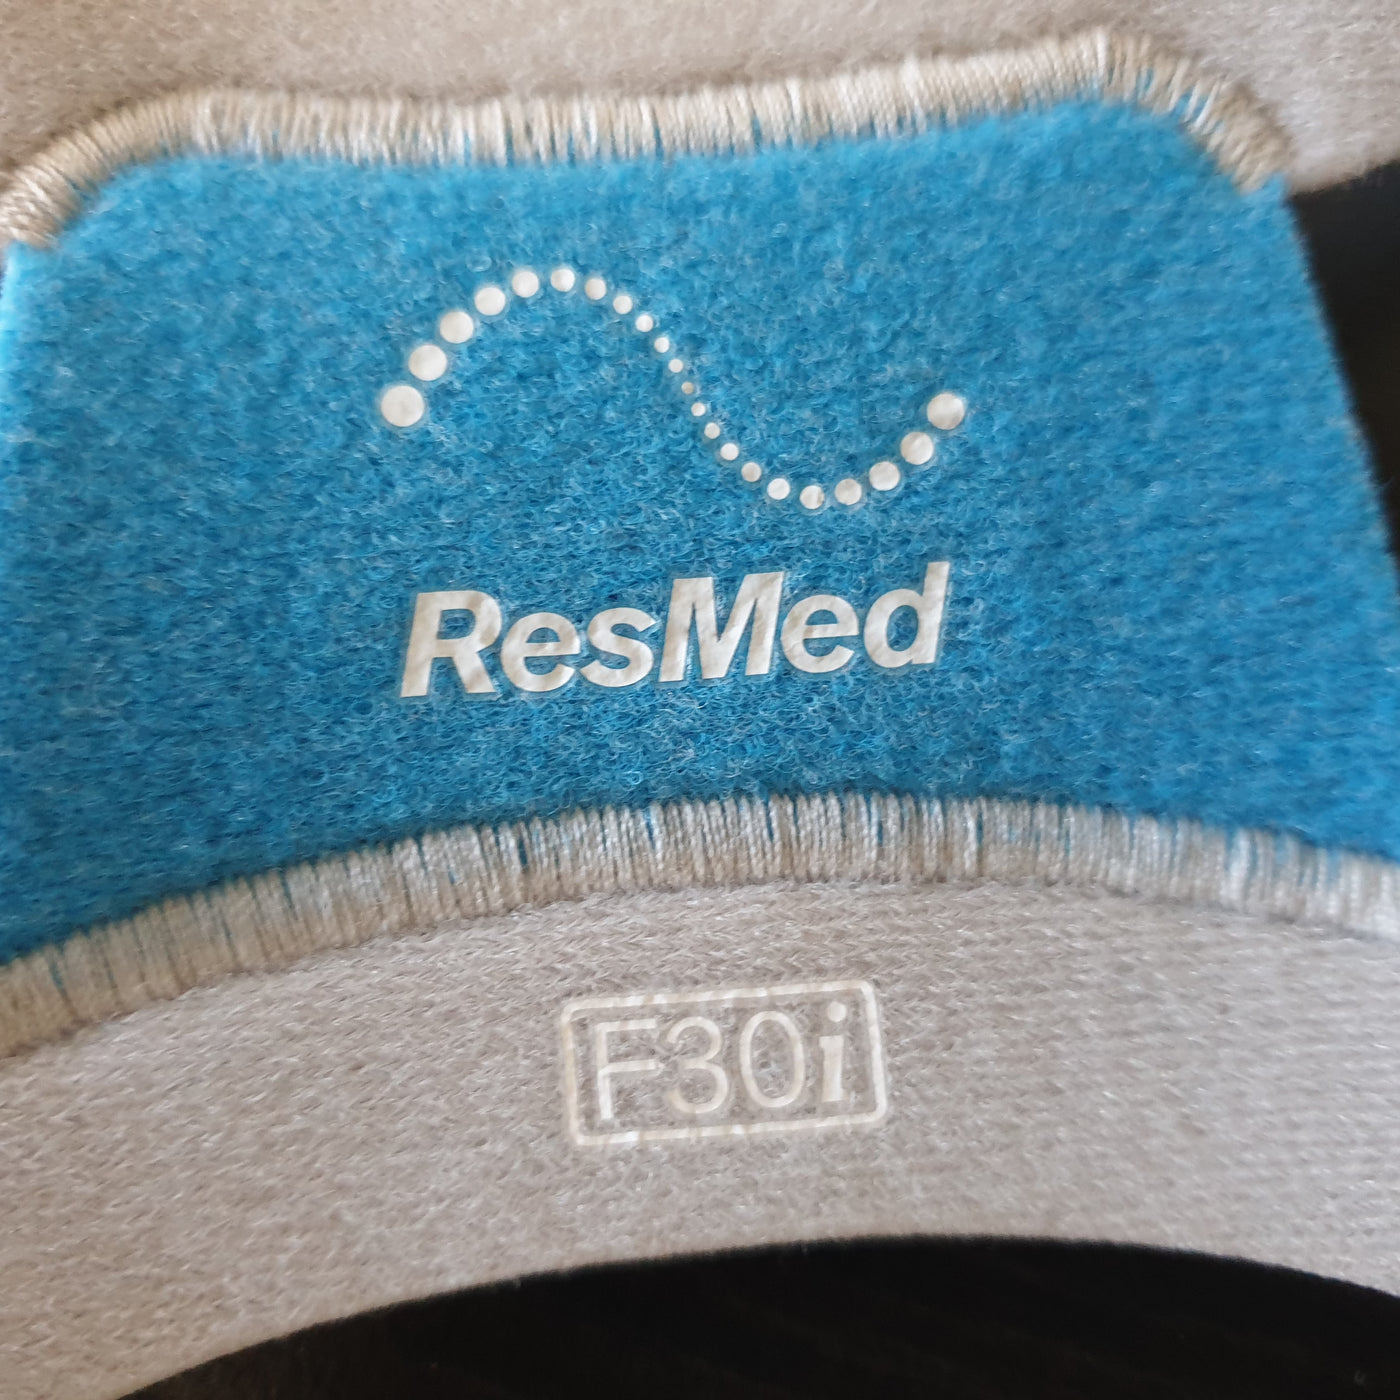 Replacement Headgear for Resmed AirFit P30i / N30i or F30i CPAP Mask